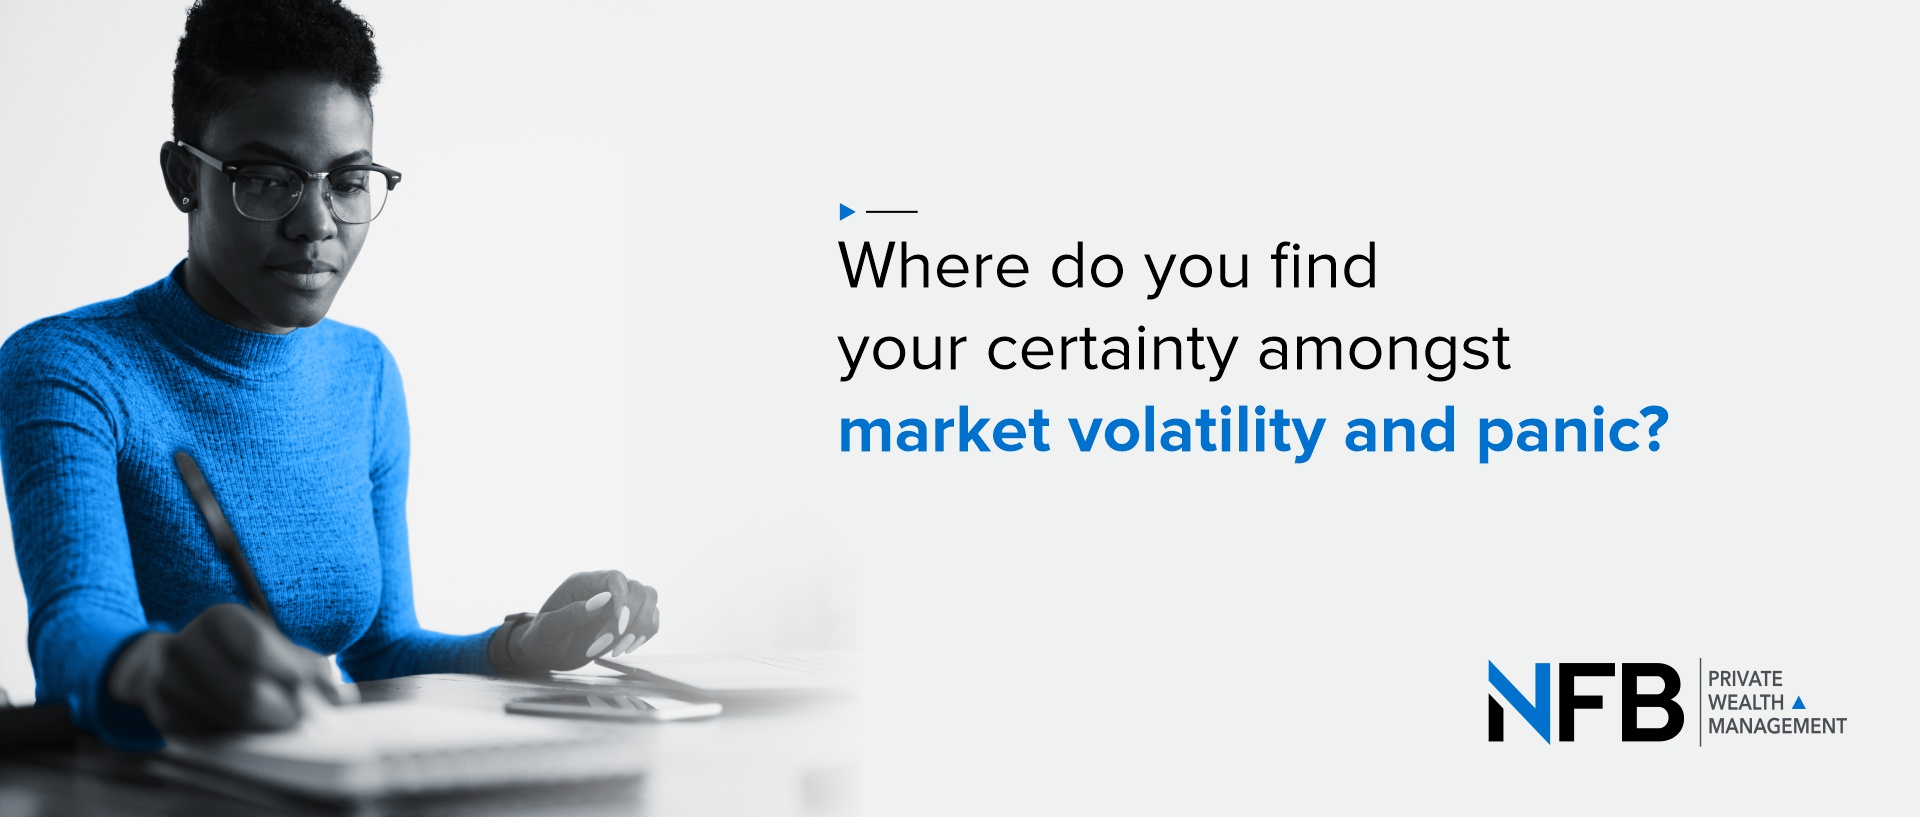 Where do you find your certainty amongst market volatility and panic?